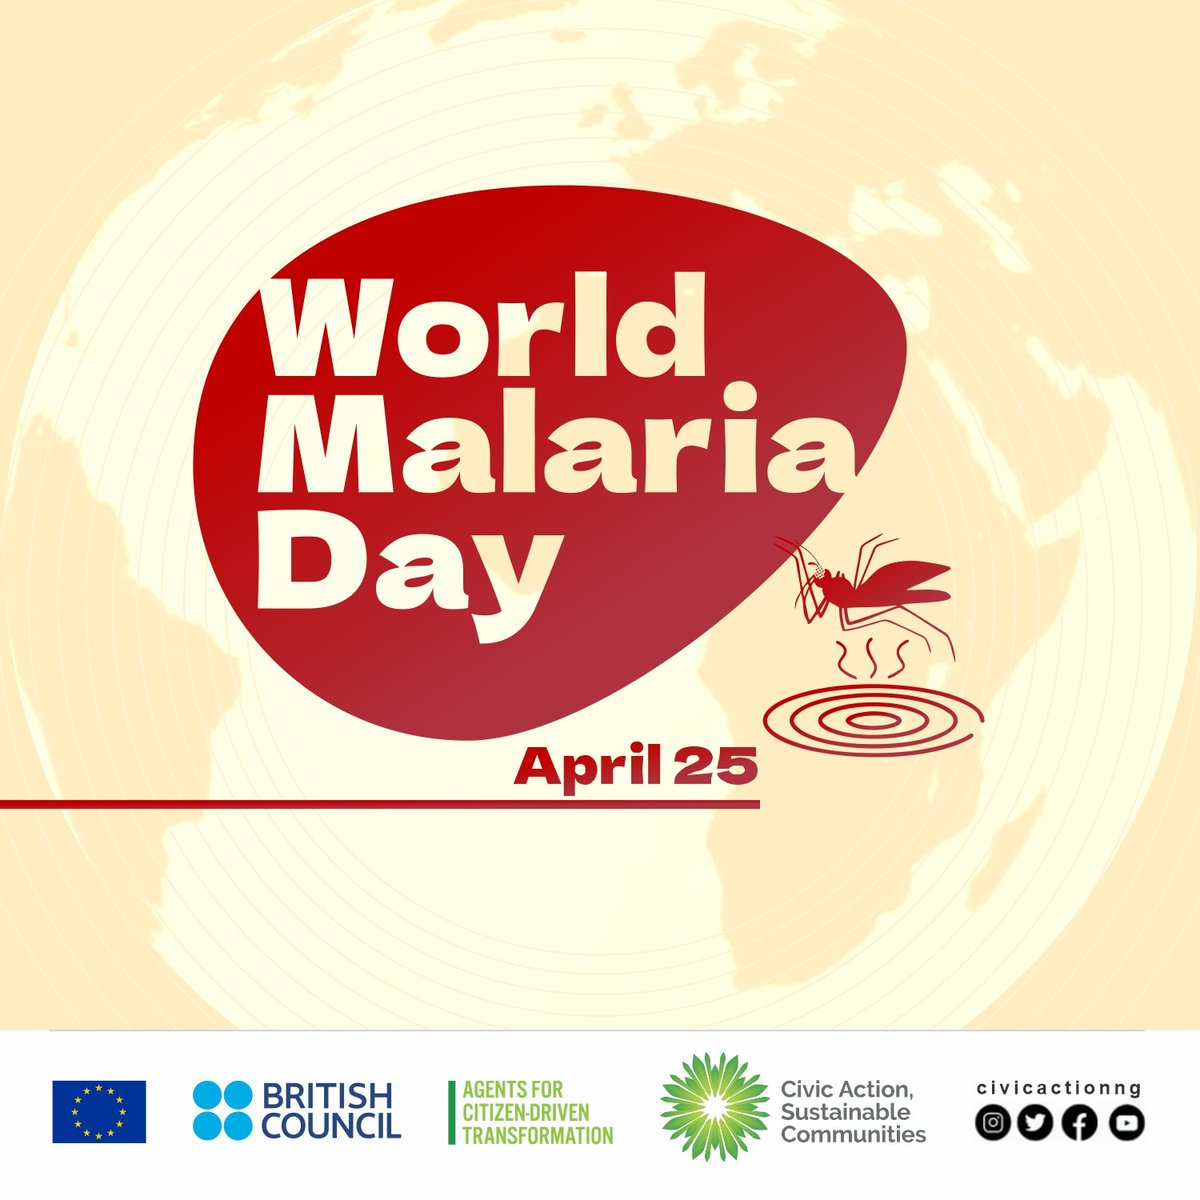 World Malaria Day is marked annually on 25 April to focus global attention on #malaria, and its devastating impact on people. This year’s theme is “Harness innovation to reduce the malaria disease burden and save lives”.

#malariafree #WorldMalariaDay2022 #prevention #MalariaDay